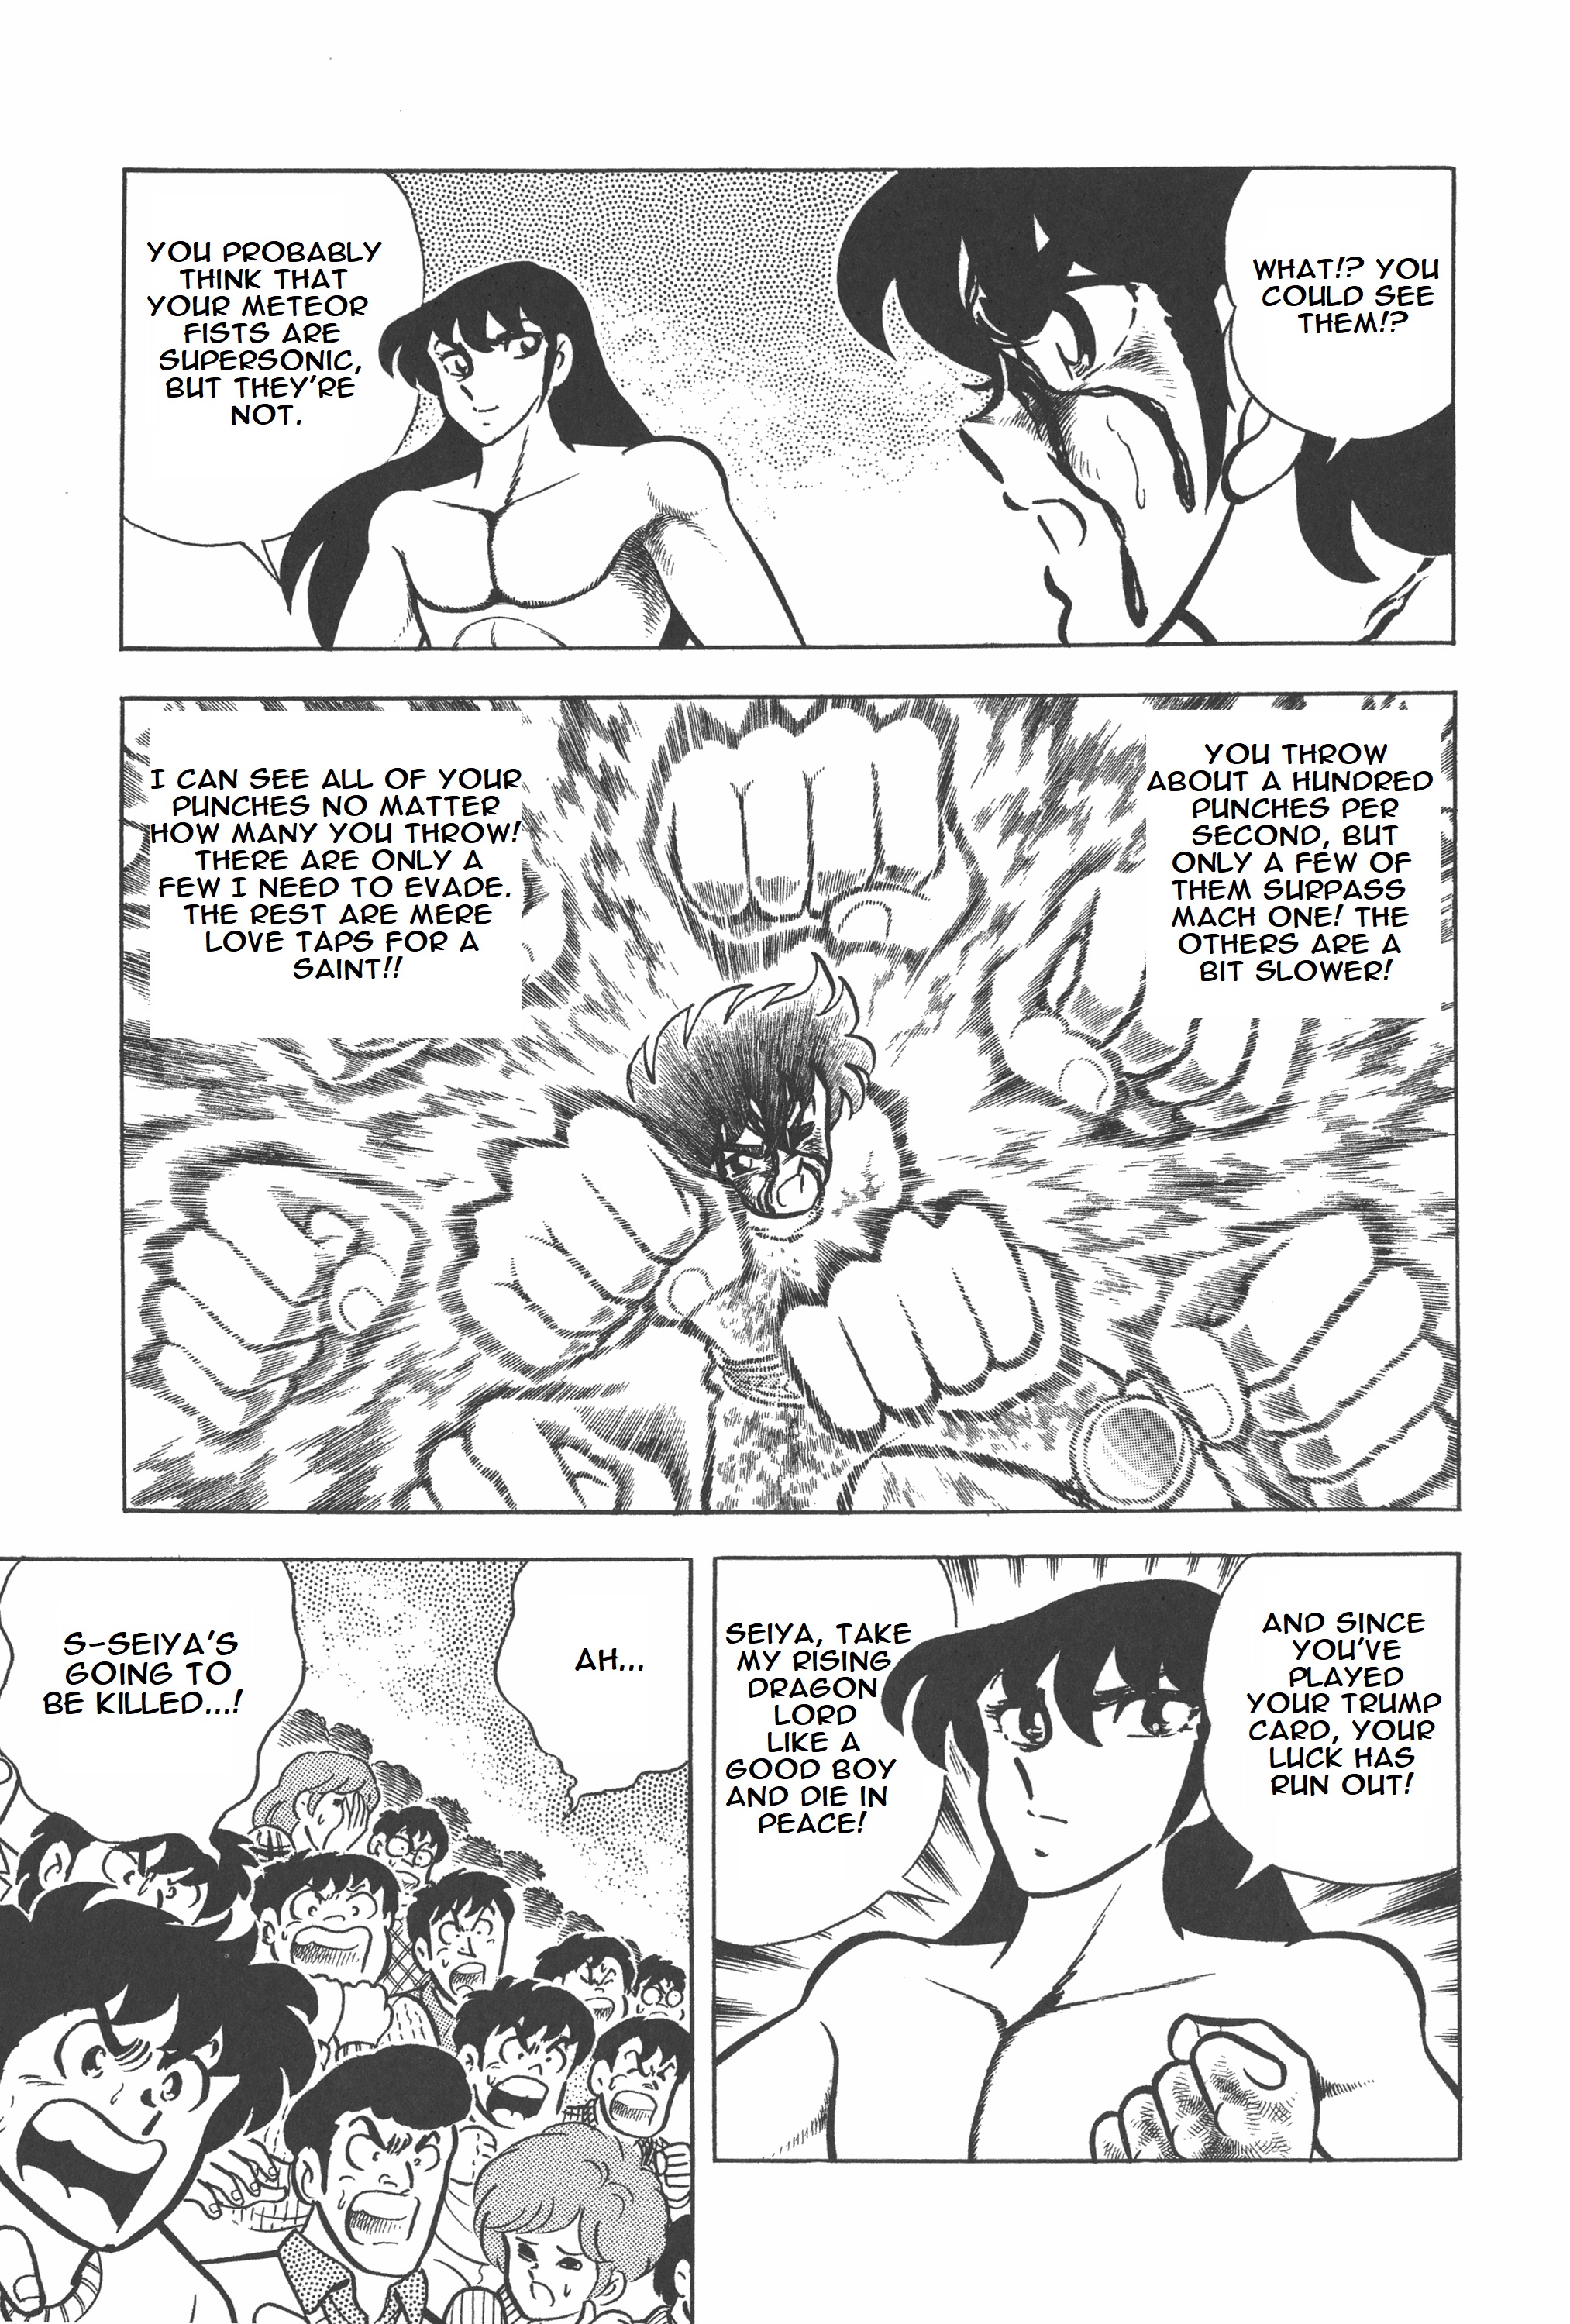 Saint Seiya (Kanzenban Edition) Vol.2 Chapter 7.2: Fight To The Death! Pegasus Vs. Dragon (Part Two) - Picture 1